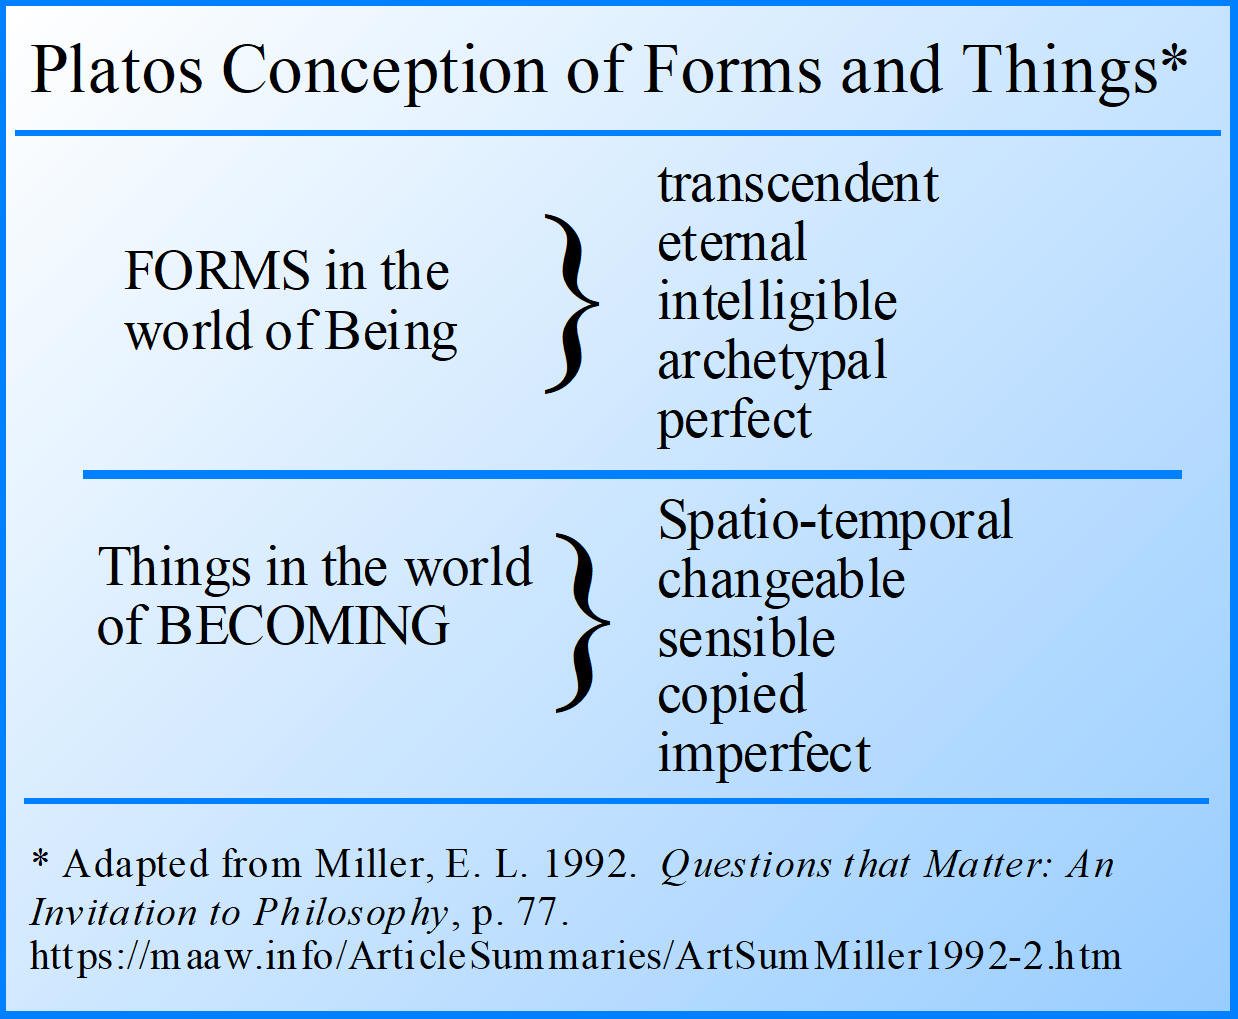 Platos Conception of Forms and Things